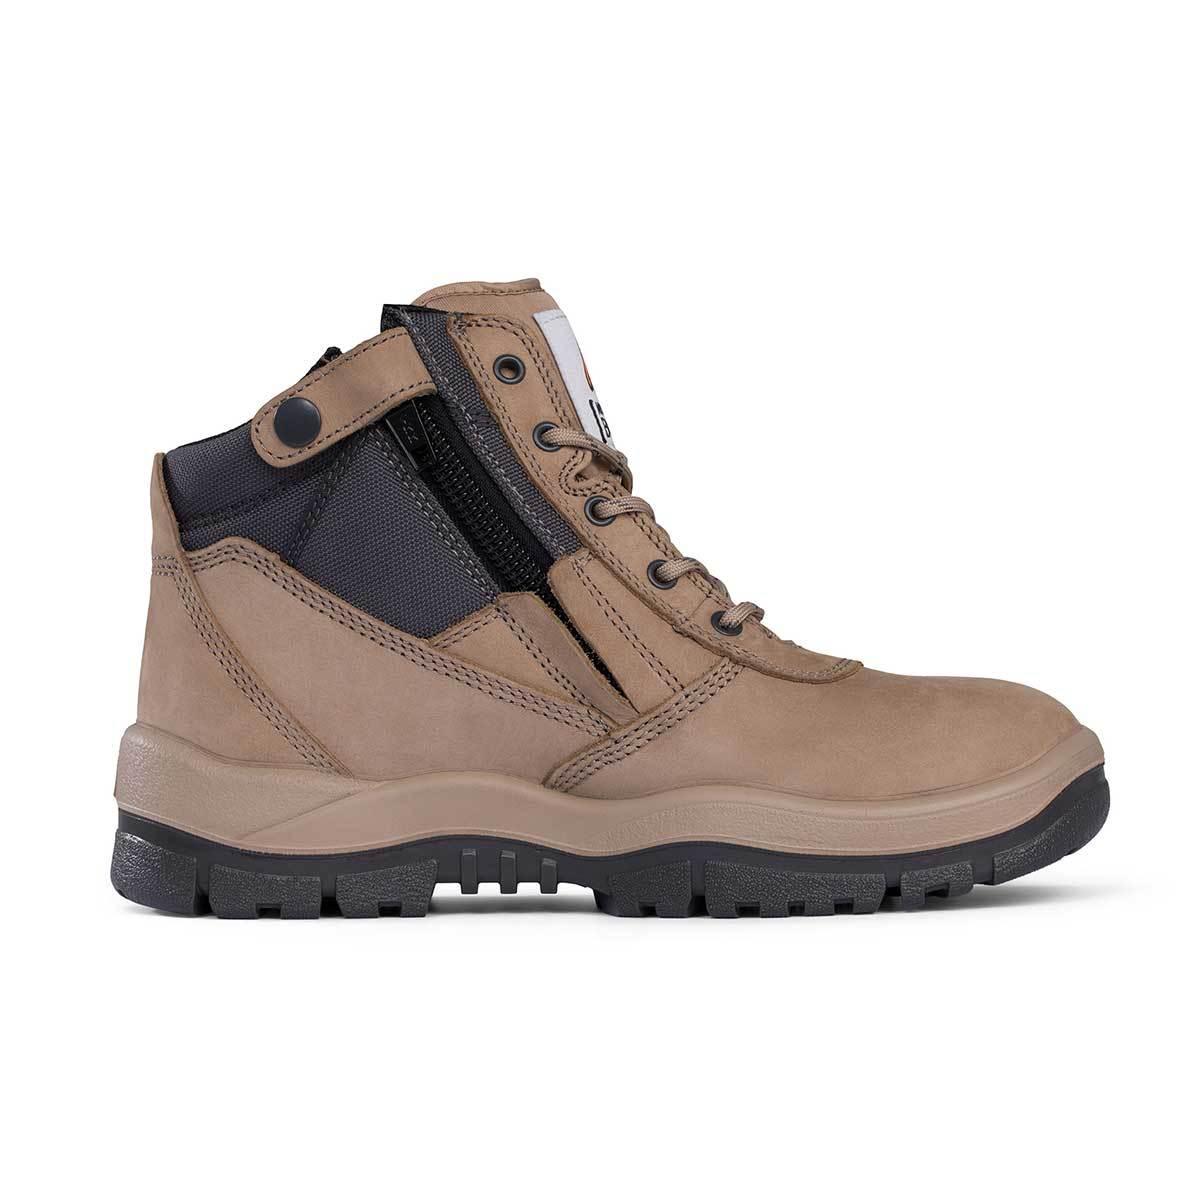 Mongrel Zipsider Safety Steel Toe Work Boots - The Next Pair